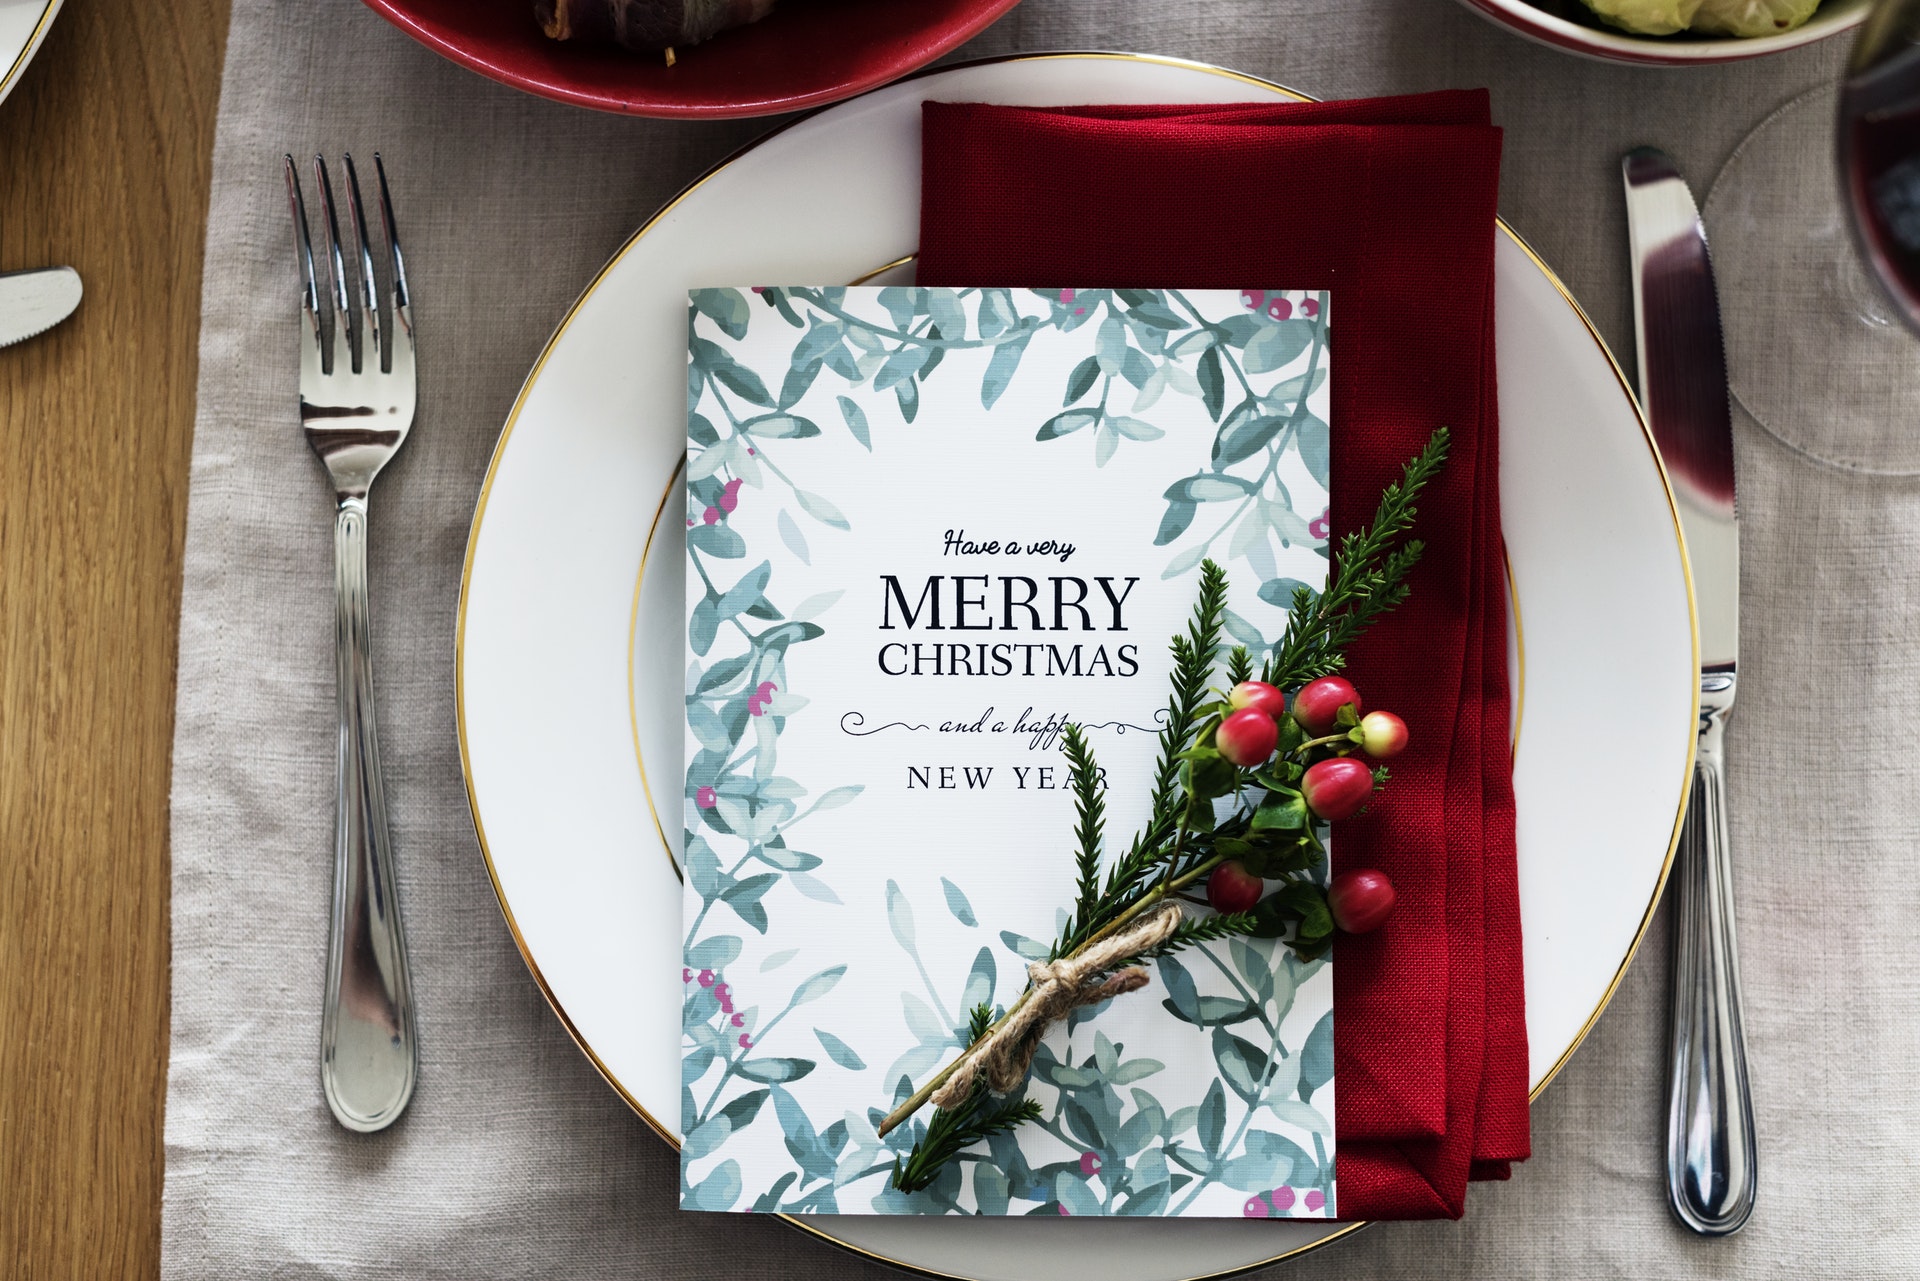 Personalised Christmas printed place settings